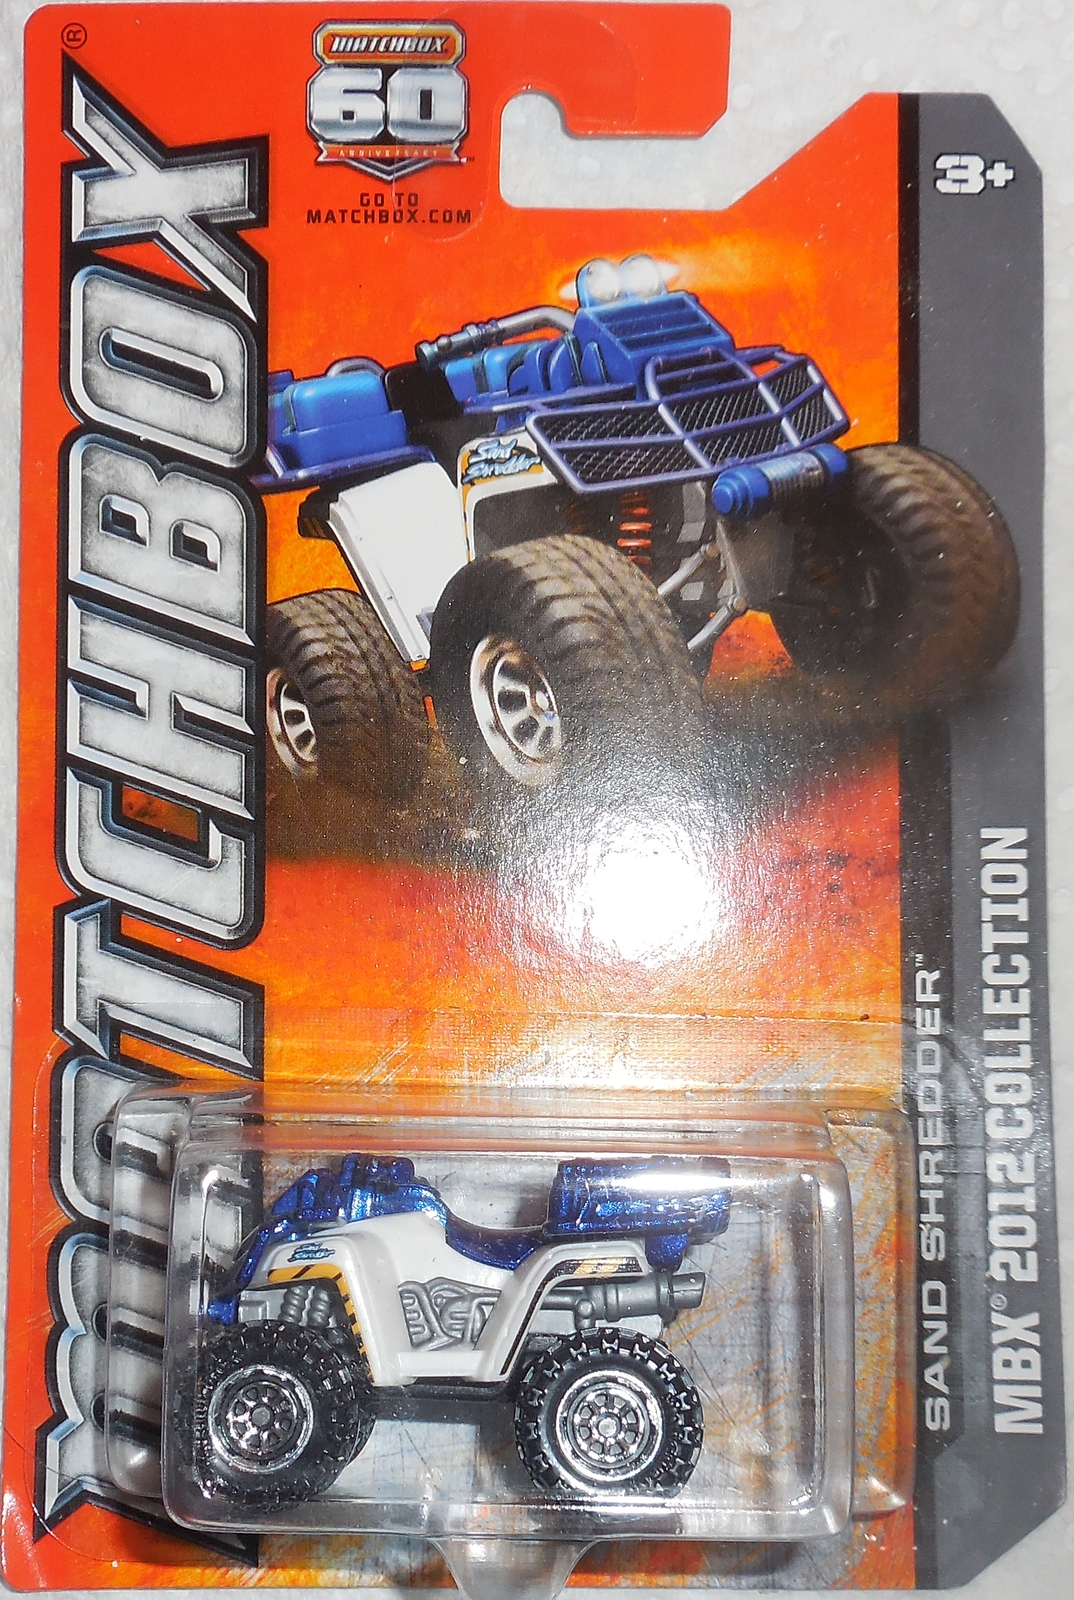 Primary image for Matchbox 2012 MBX 2012 Collection "Sand Shredder" Mint Vehicle On Sealed Card